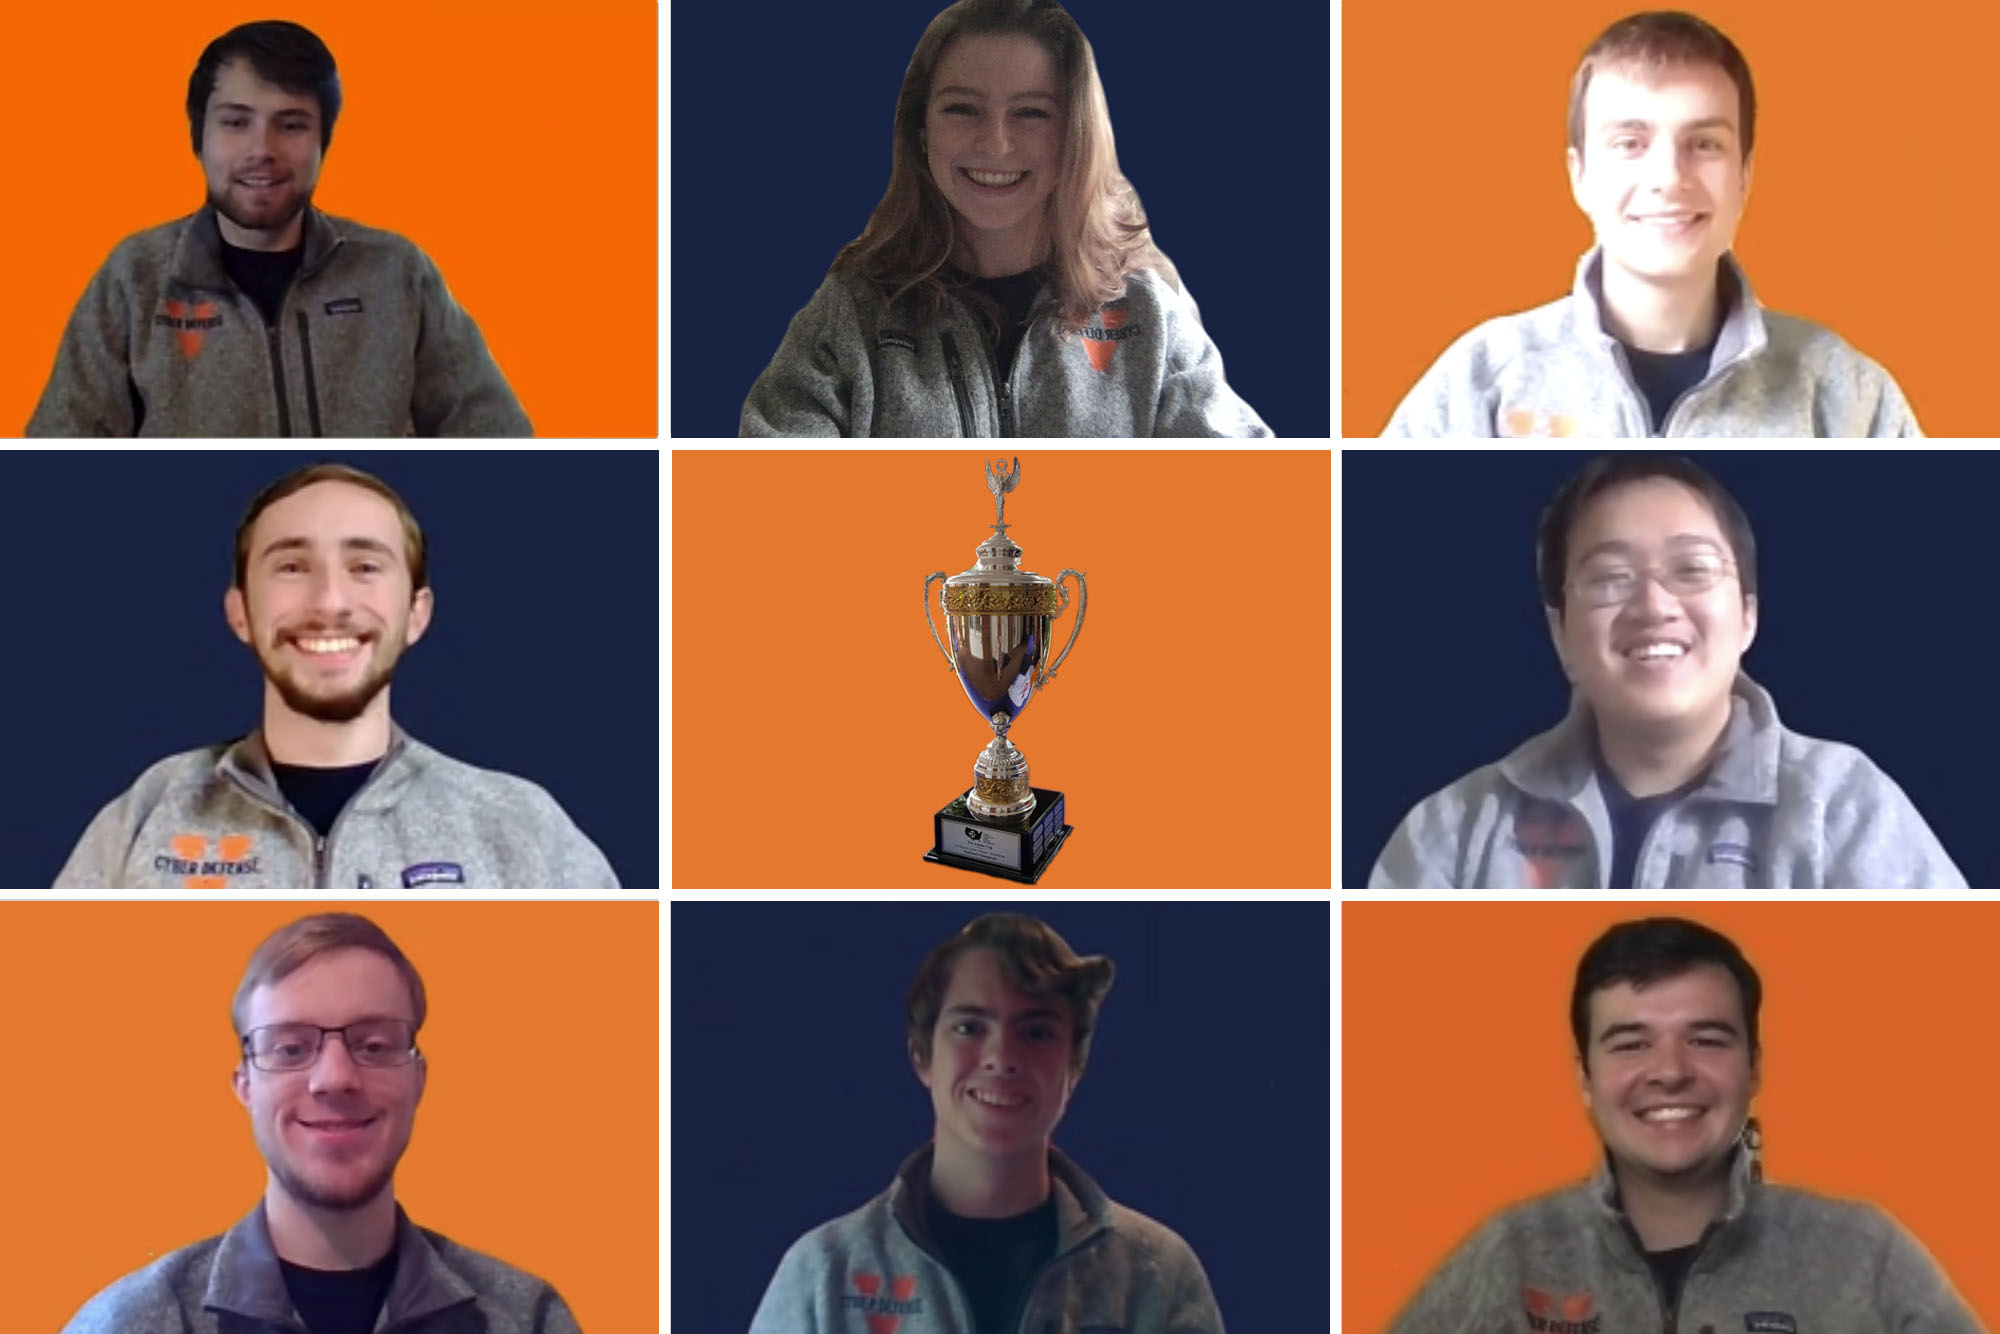 Collage of 8 peoples headshots and in the very middle is a trophy